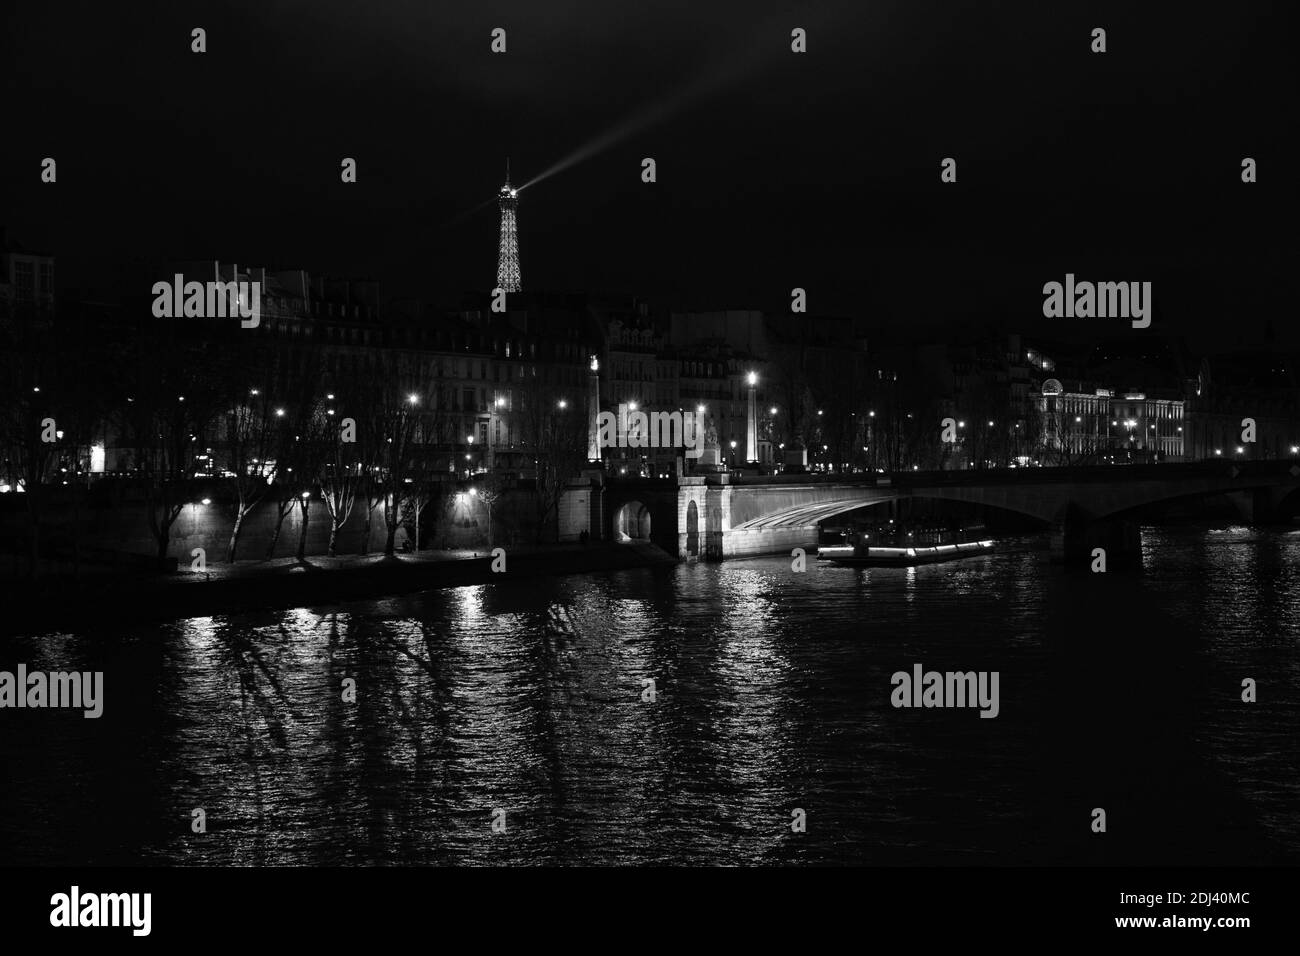 PARIS, FRANCE - DECEMBER 2, 2018:  Night view of illuminated Eiffel tower and Seine river landscape. Black white photo Stock Photo